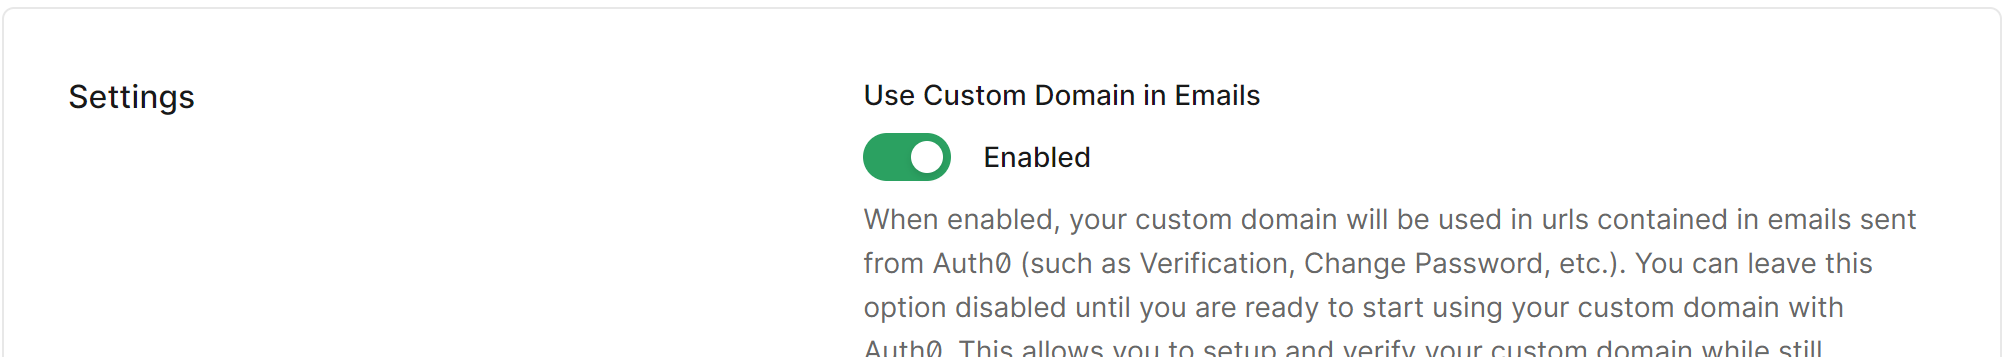 Settings > Use Custom Domain in Emails を有効化認